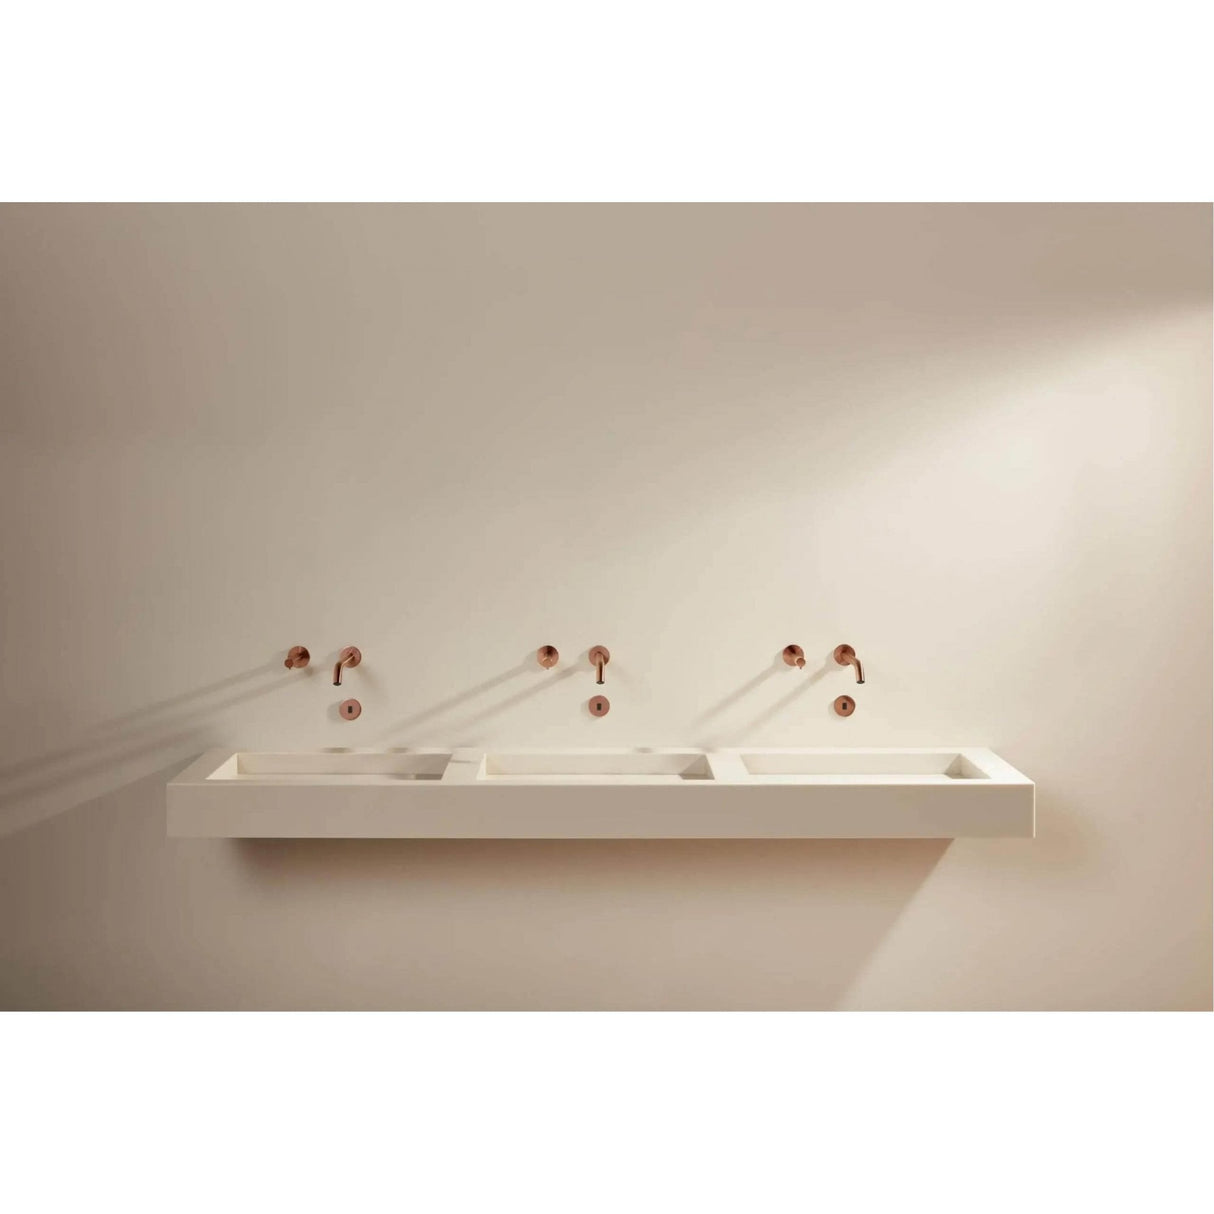 The Monolith M+ or L+ Series Wall Mounted Wash Basin L.1800mm (450 or 600mm Depth)